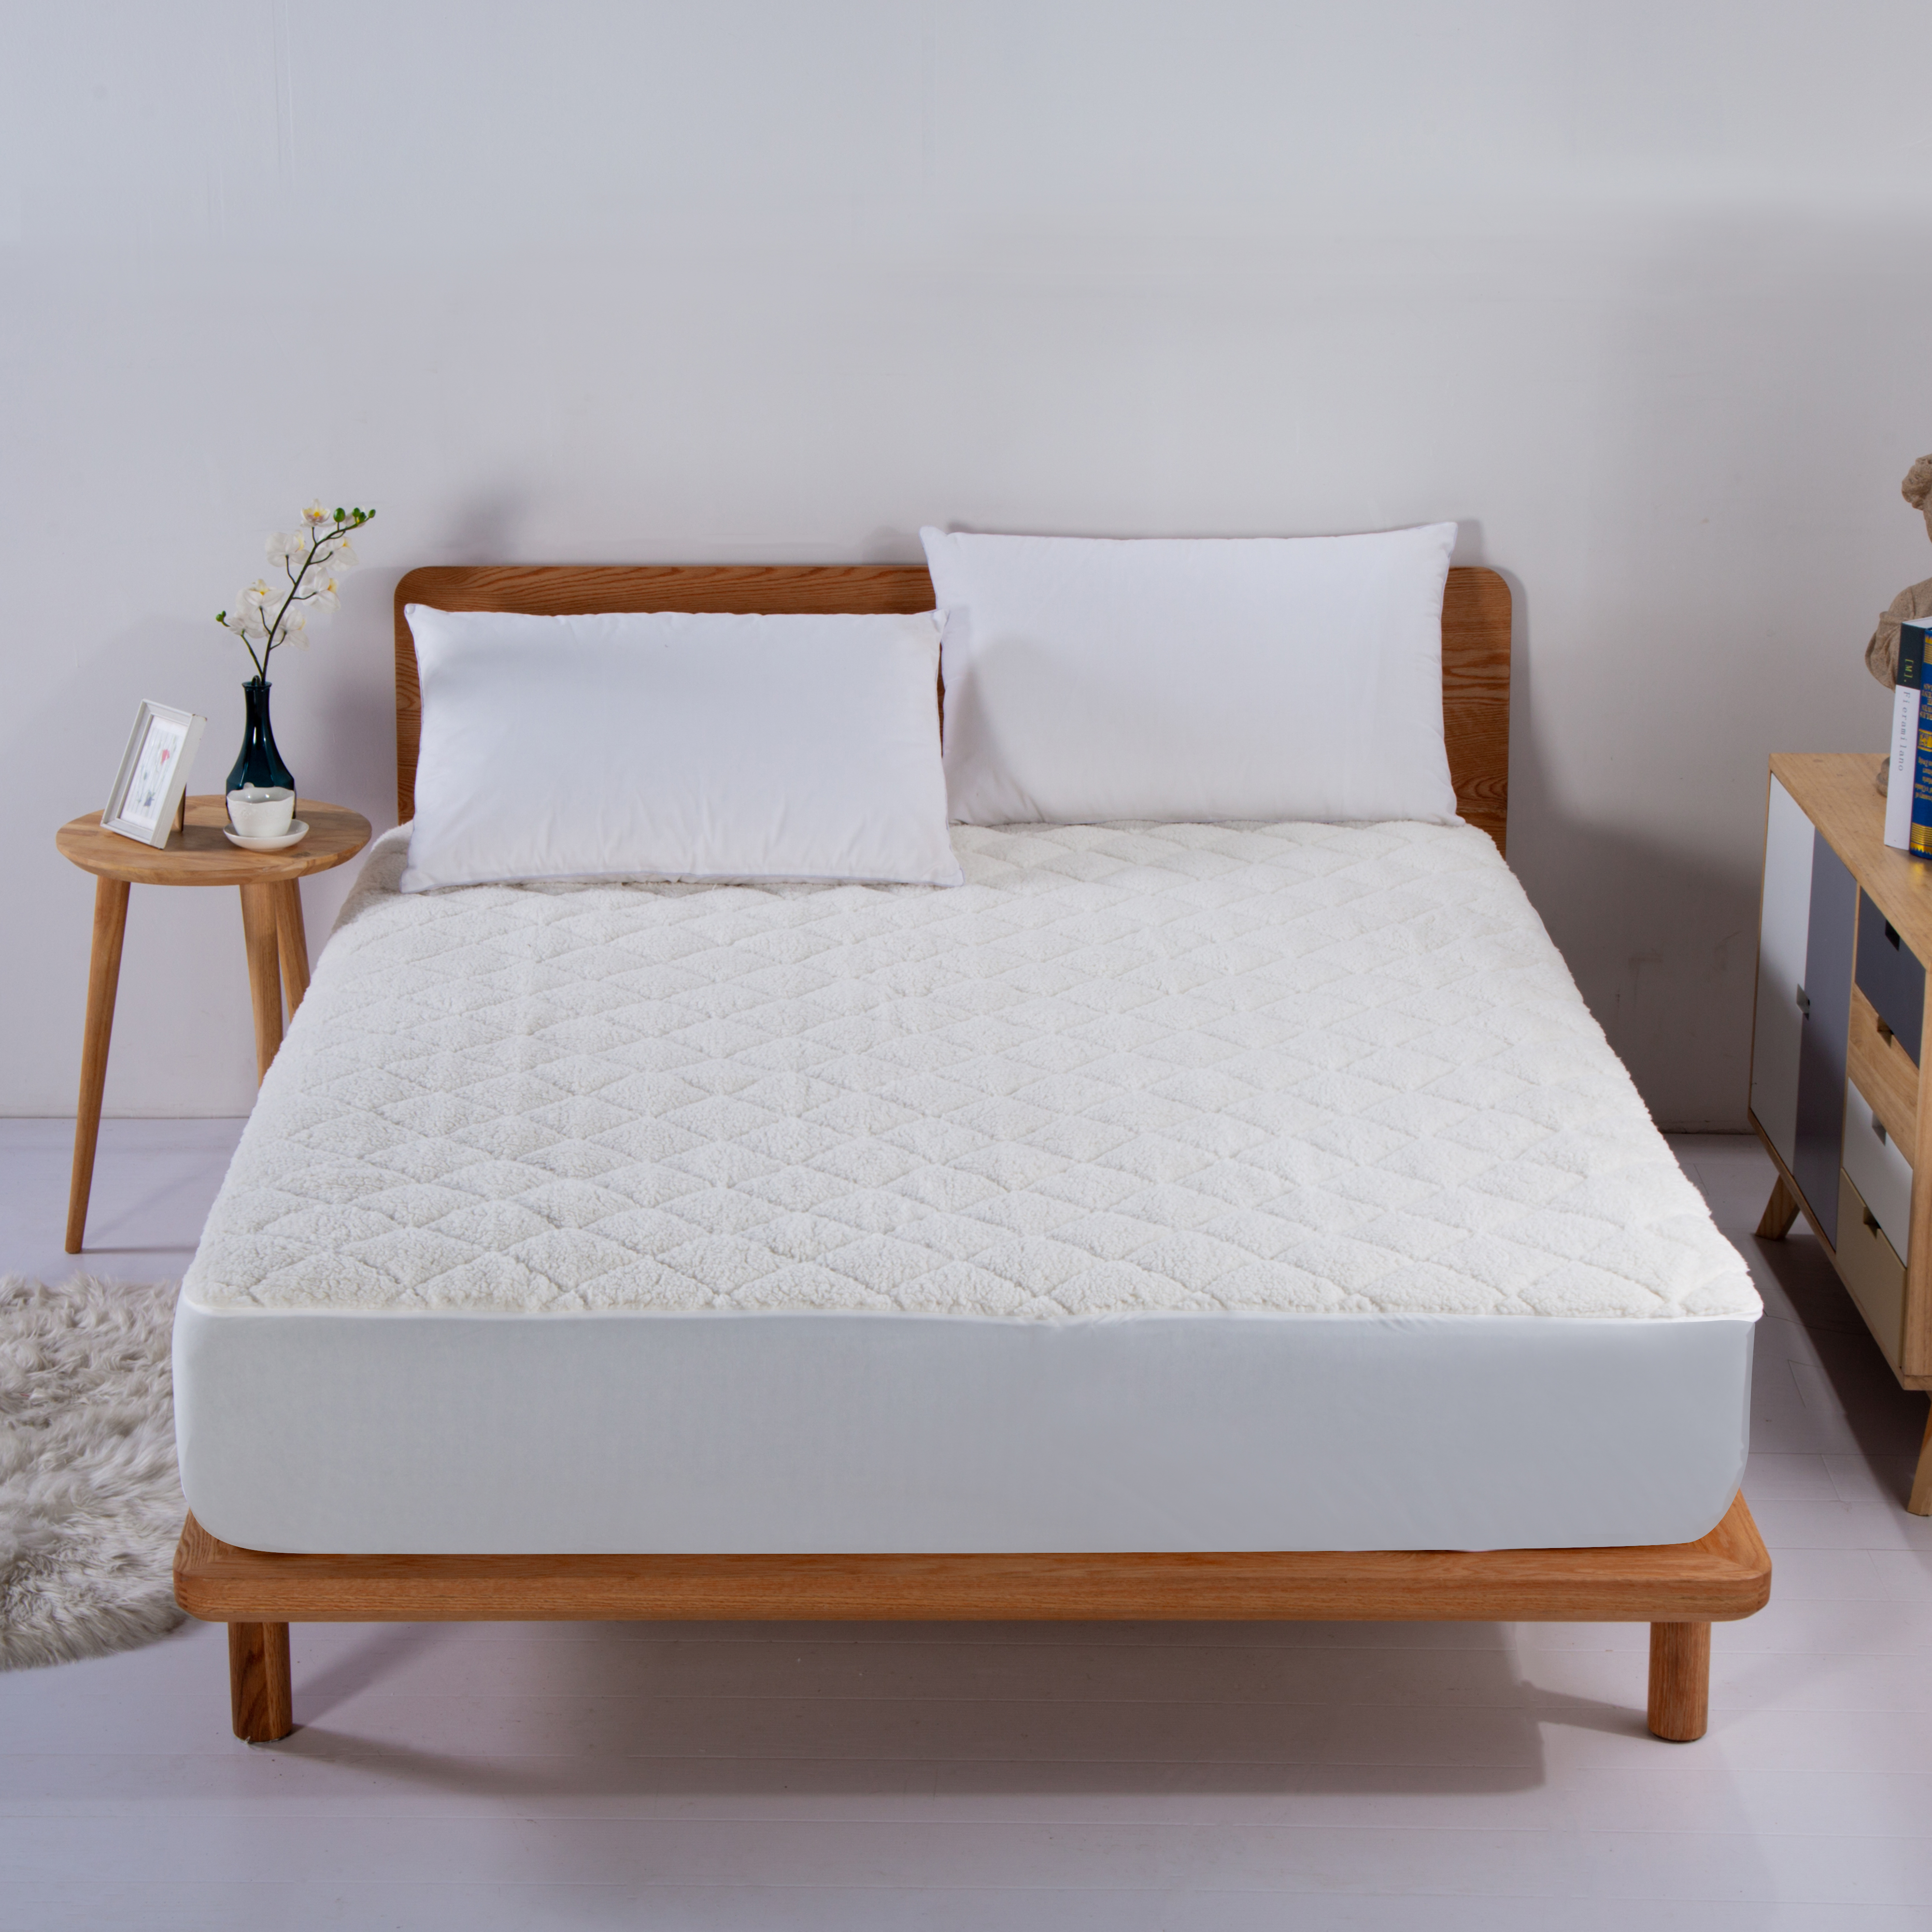 quilted mattress pad /cover